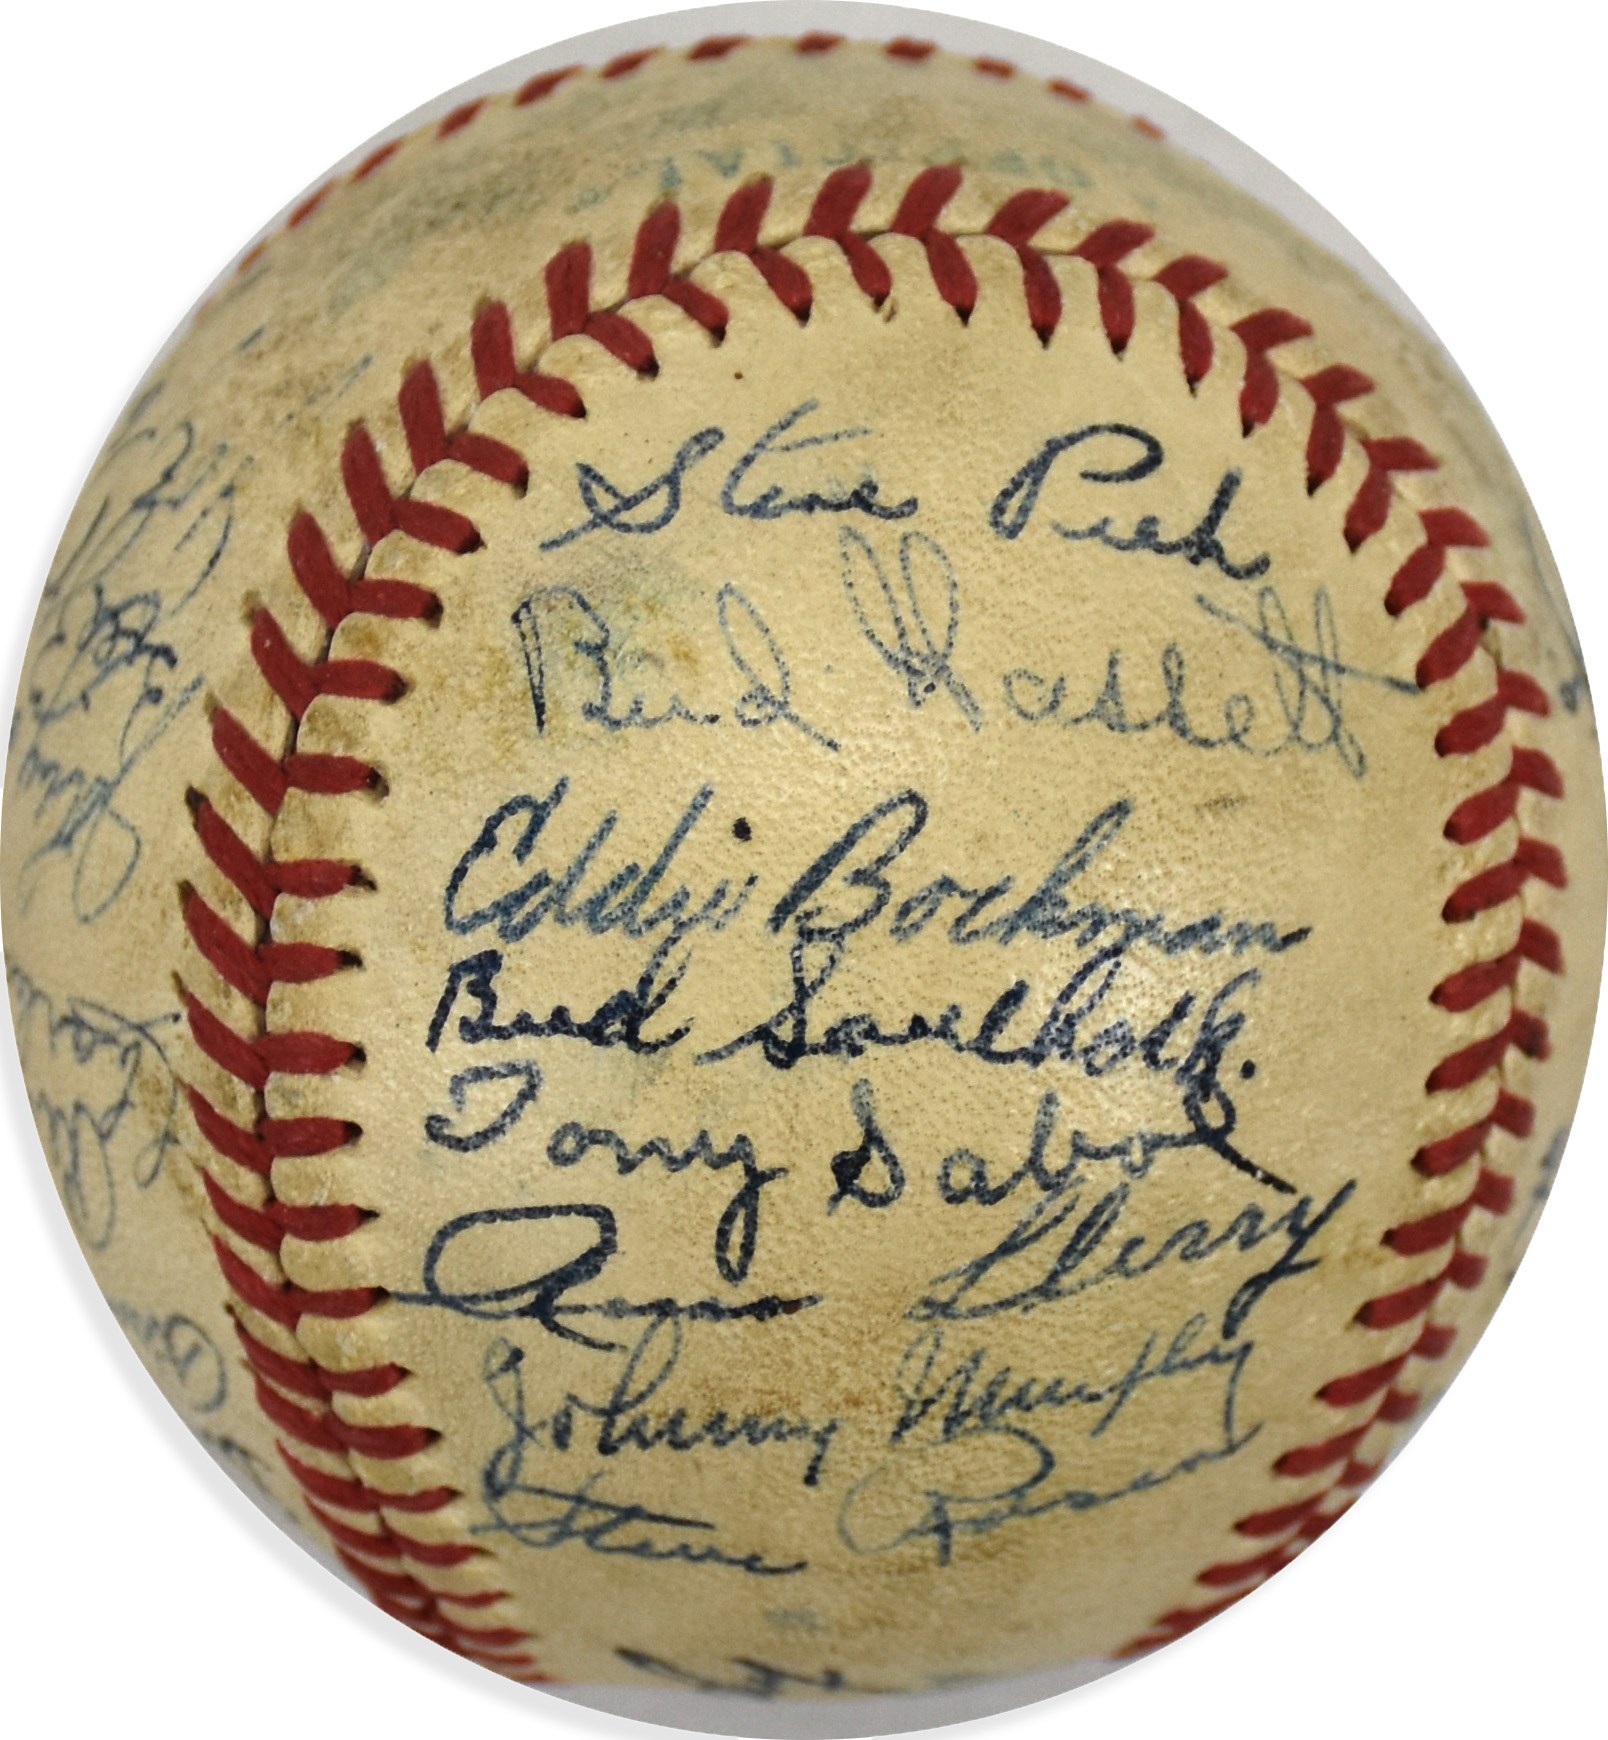 - 1946 New York Yankees Team-Signed Baseball from Pete Sheehy (PSA)